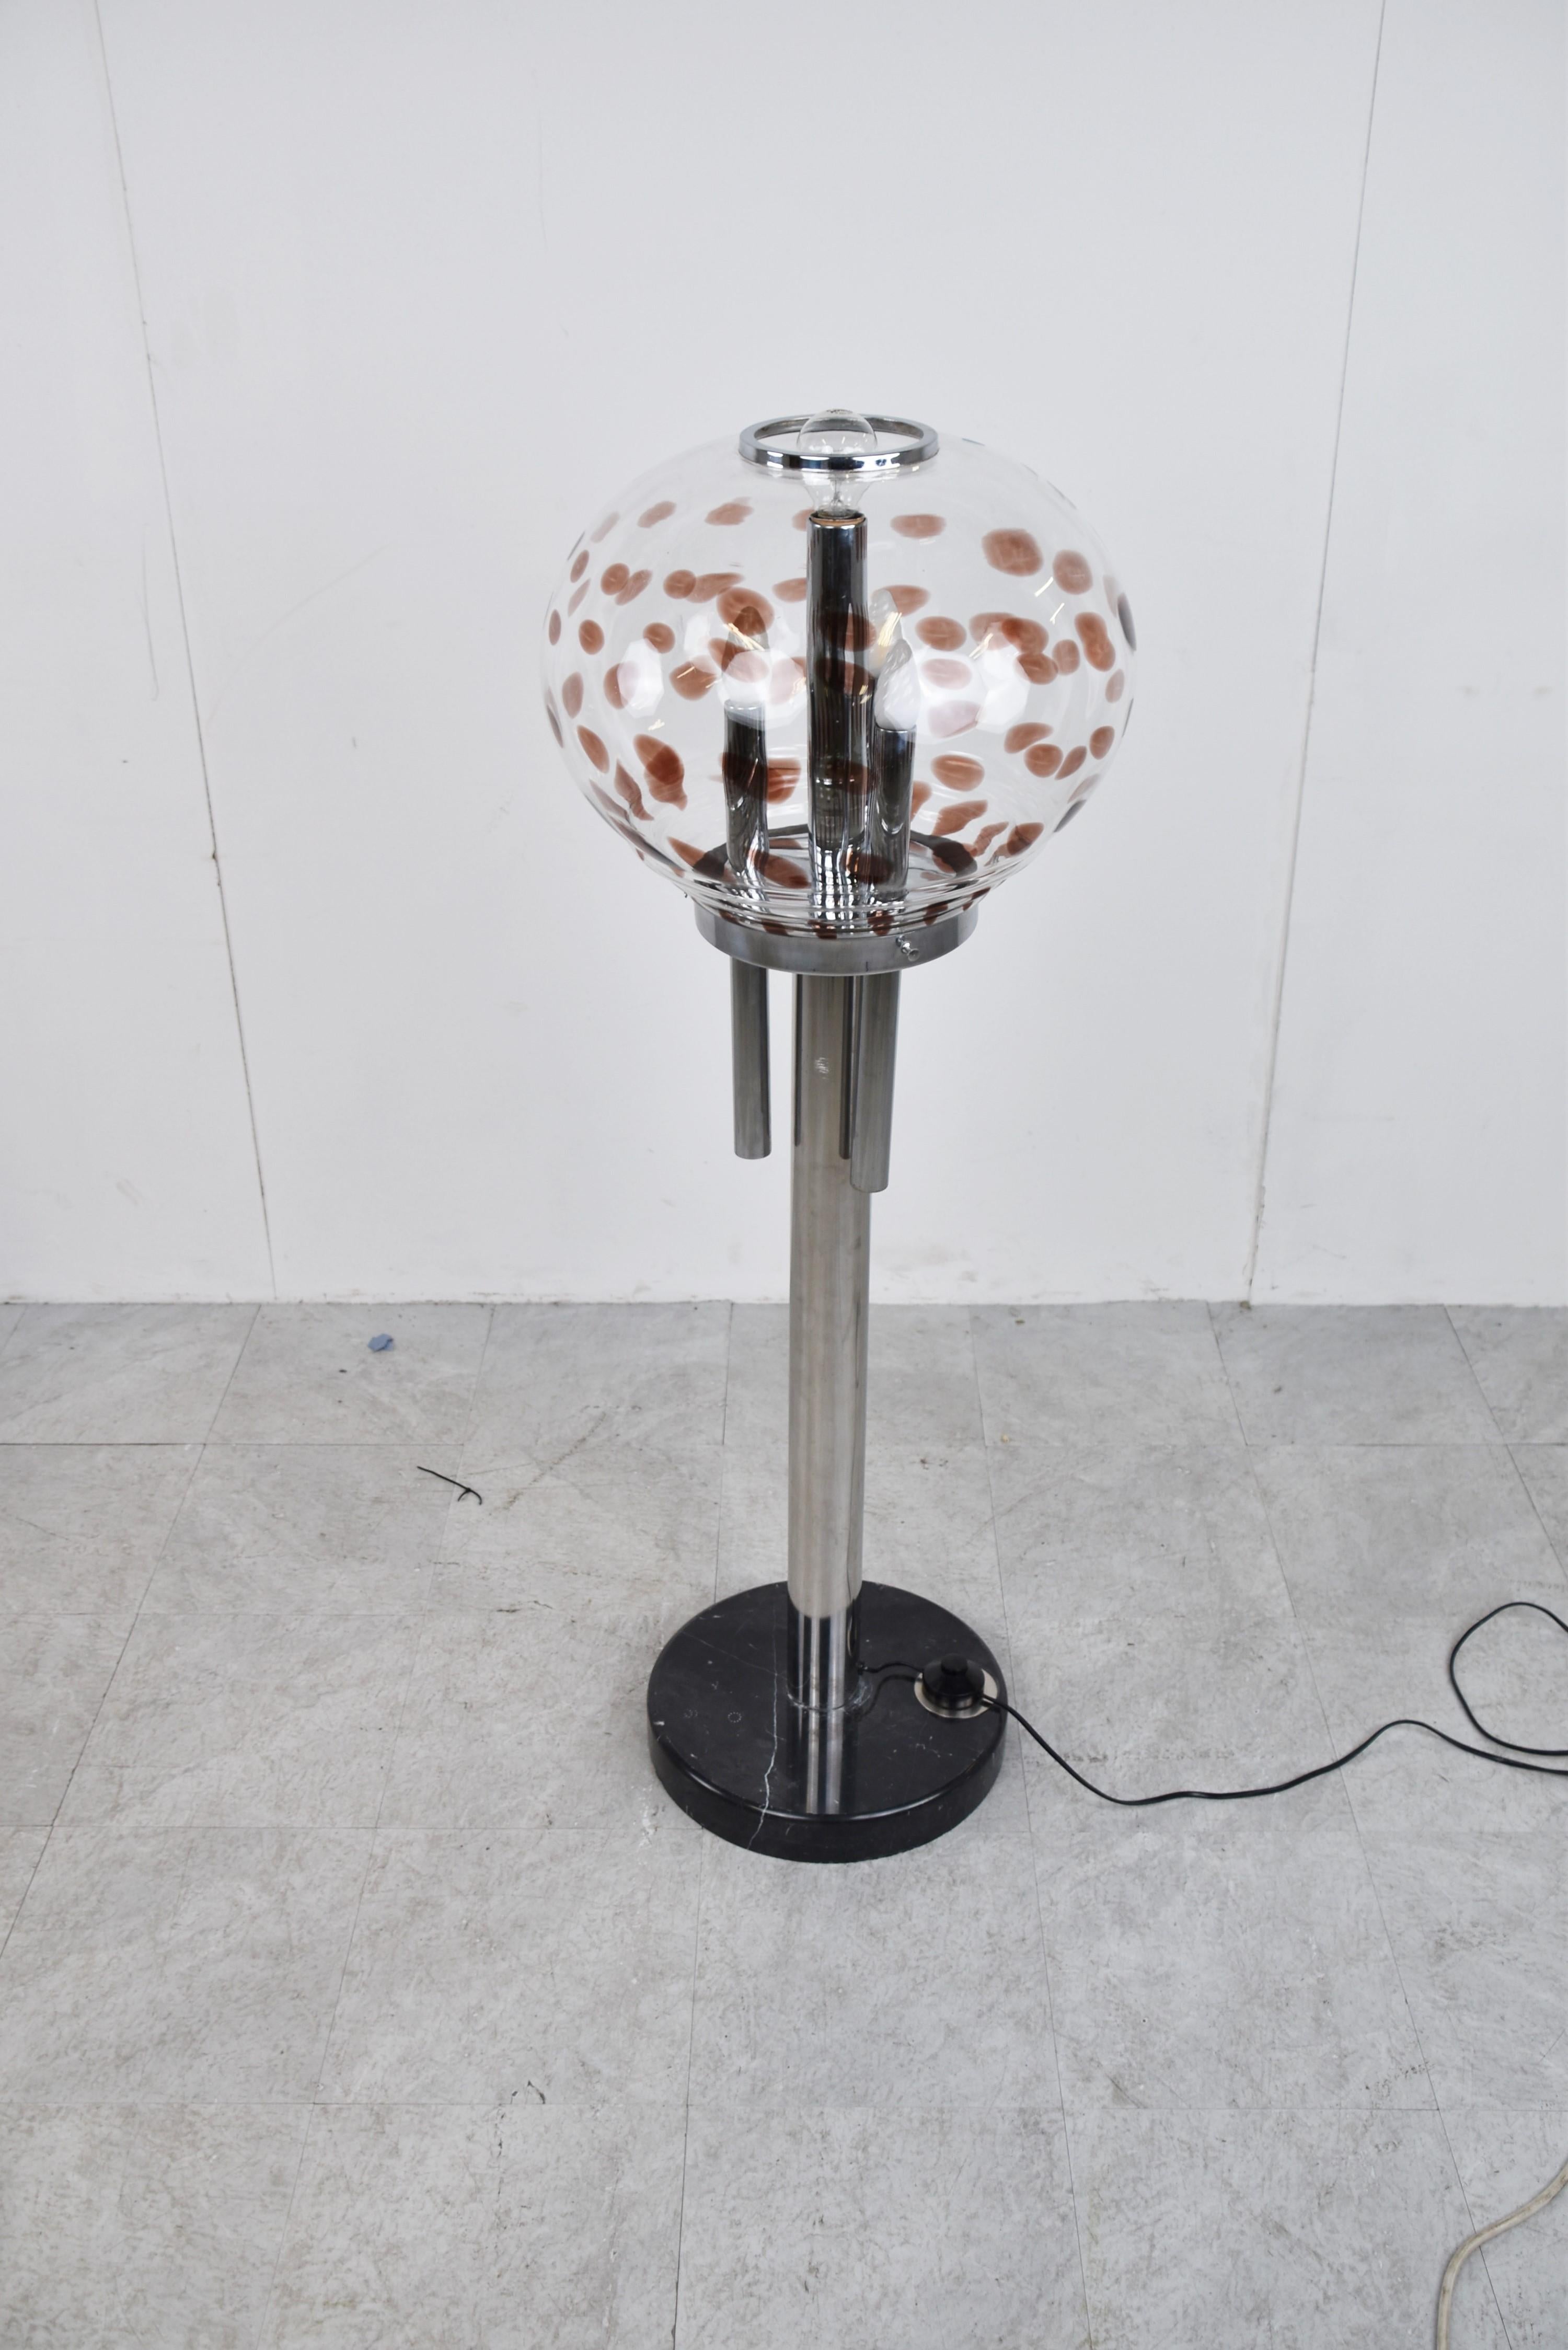 Vintage floor lamp with a chrome and black marble base featuring a stained glass lamp shade.

The lamp works with 3 e14 light bulbs and one e27 light bulbs.

Very good condition, tested and ready to use.

1960s - Italy

Height: